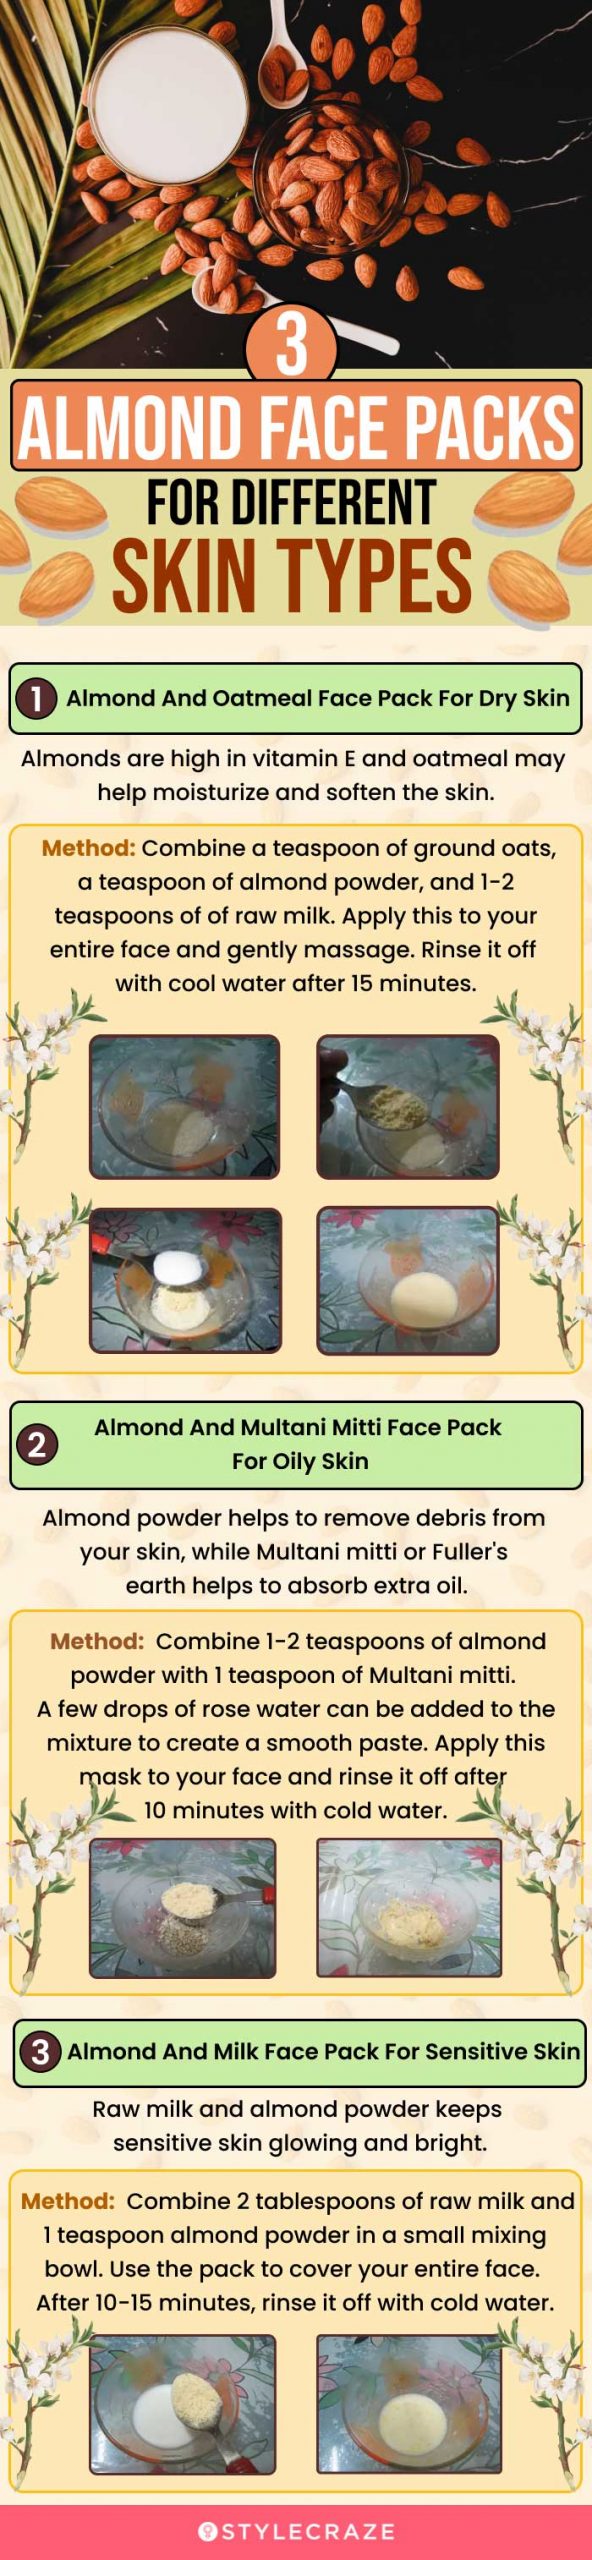 3 almond face packs for different skin types (infographic)